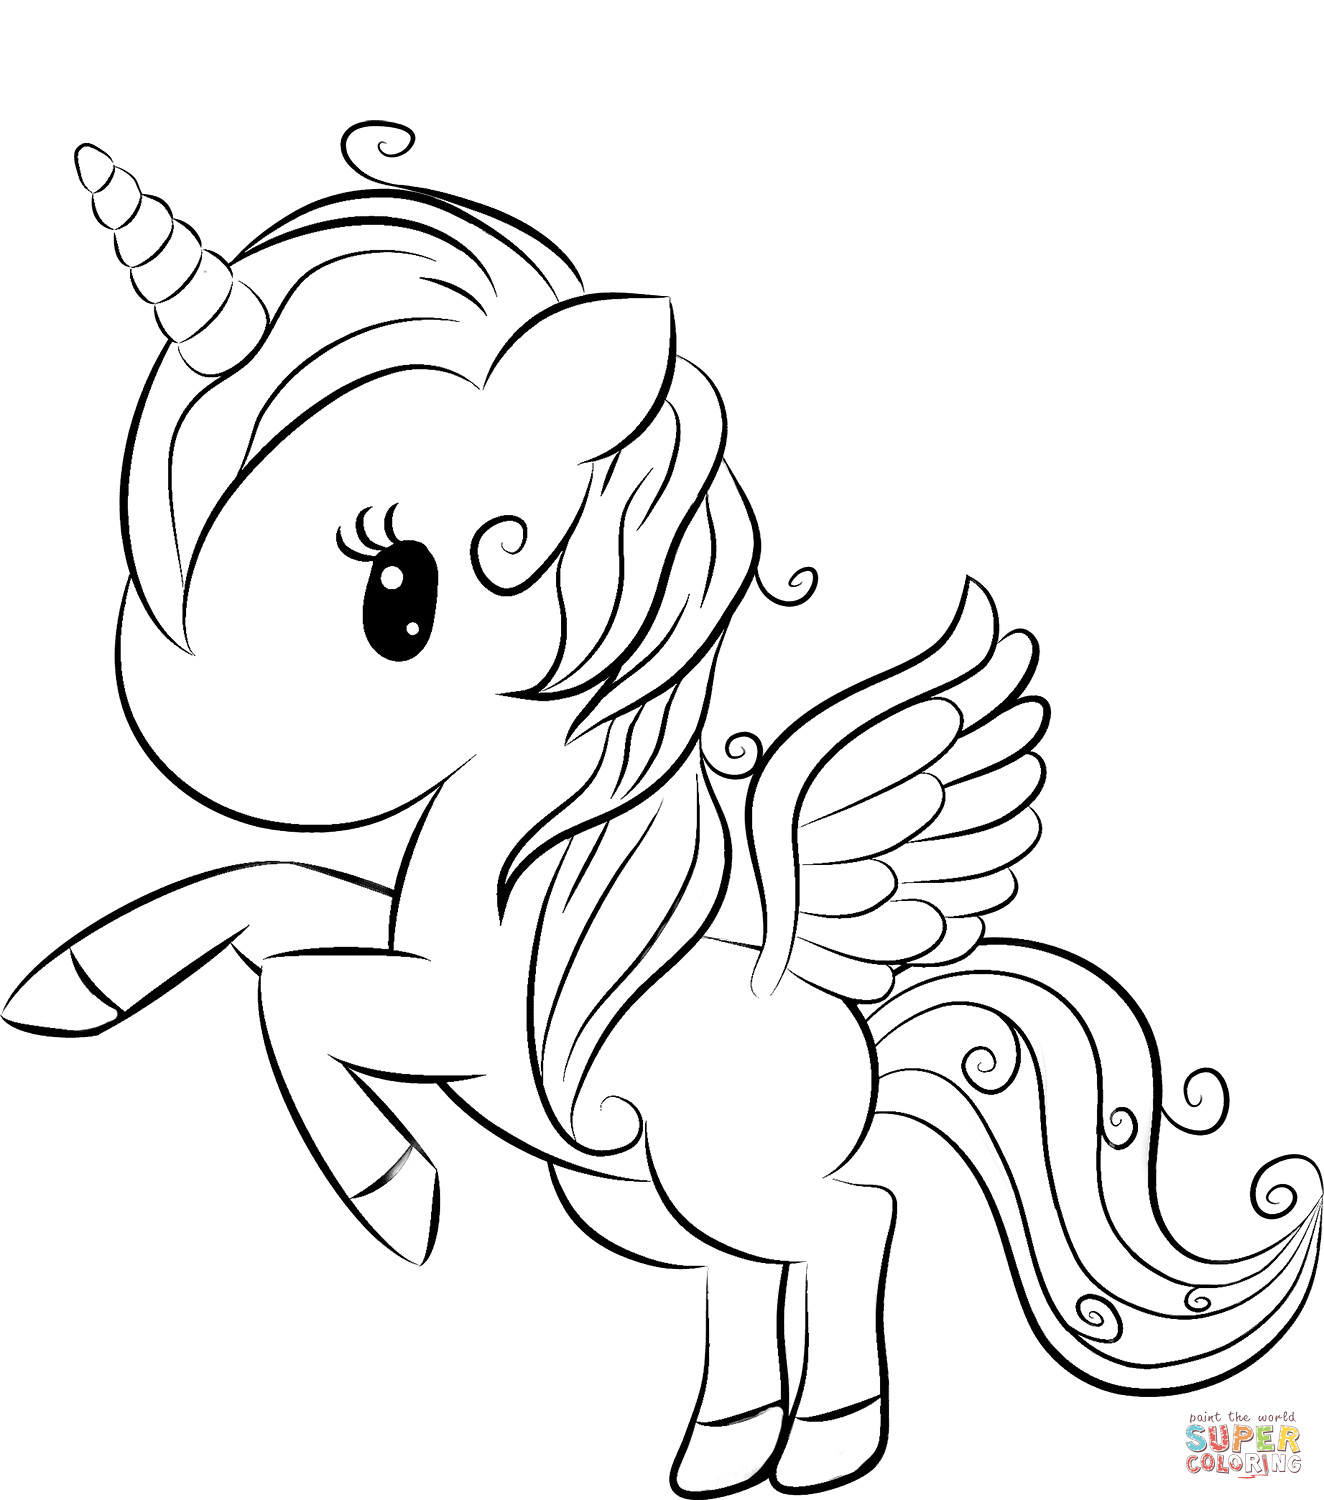 Kids Coloring Pages Unicorn
 Cute Unicorn coloring page